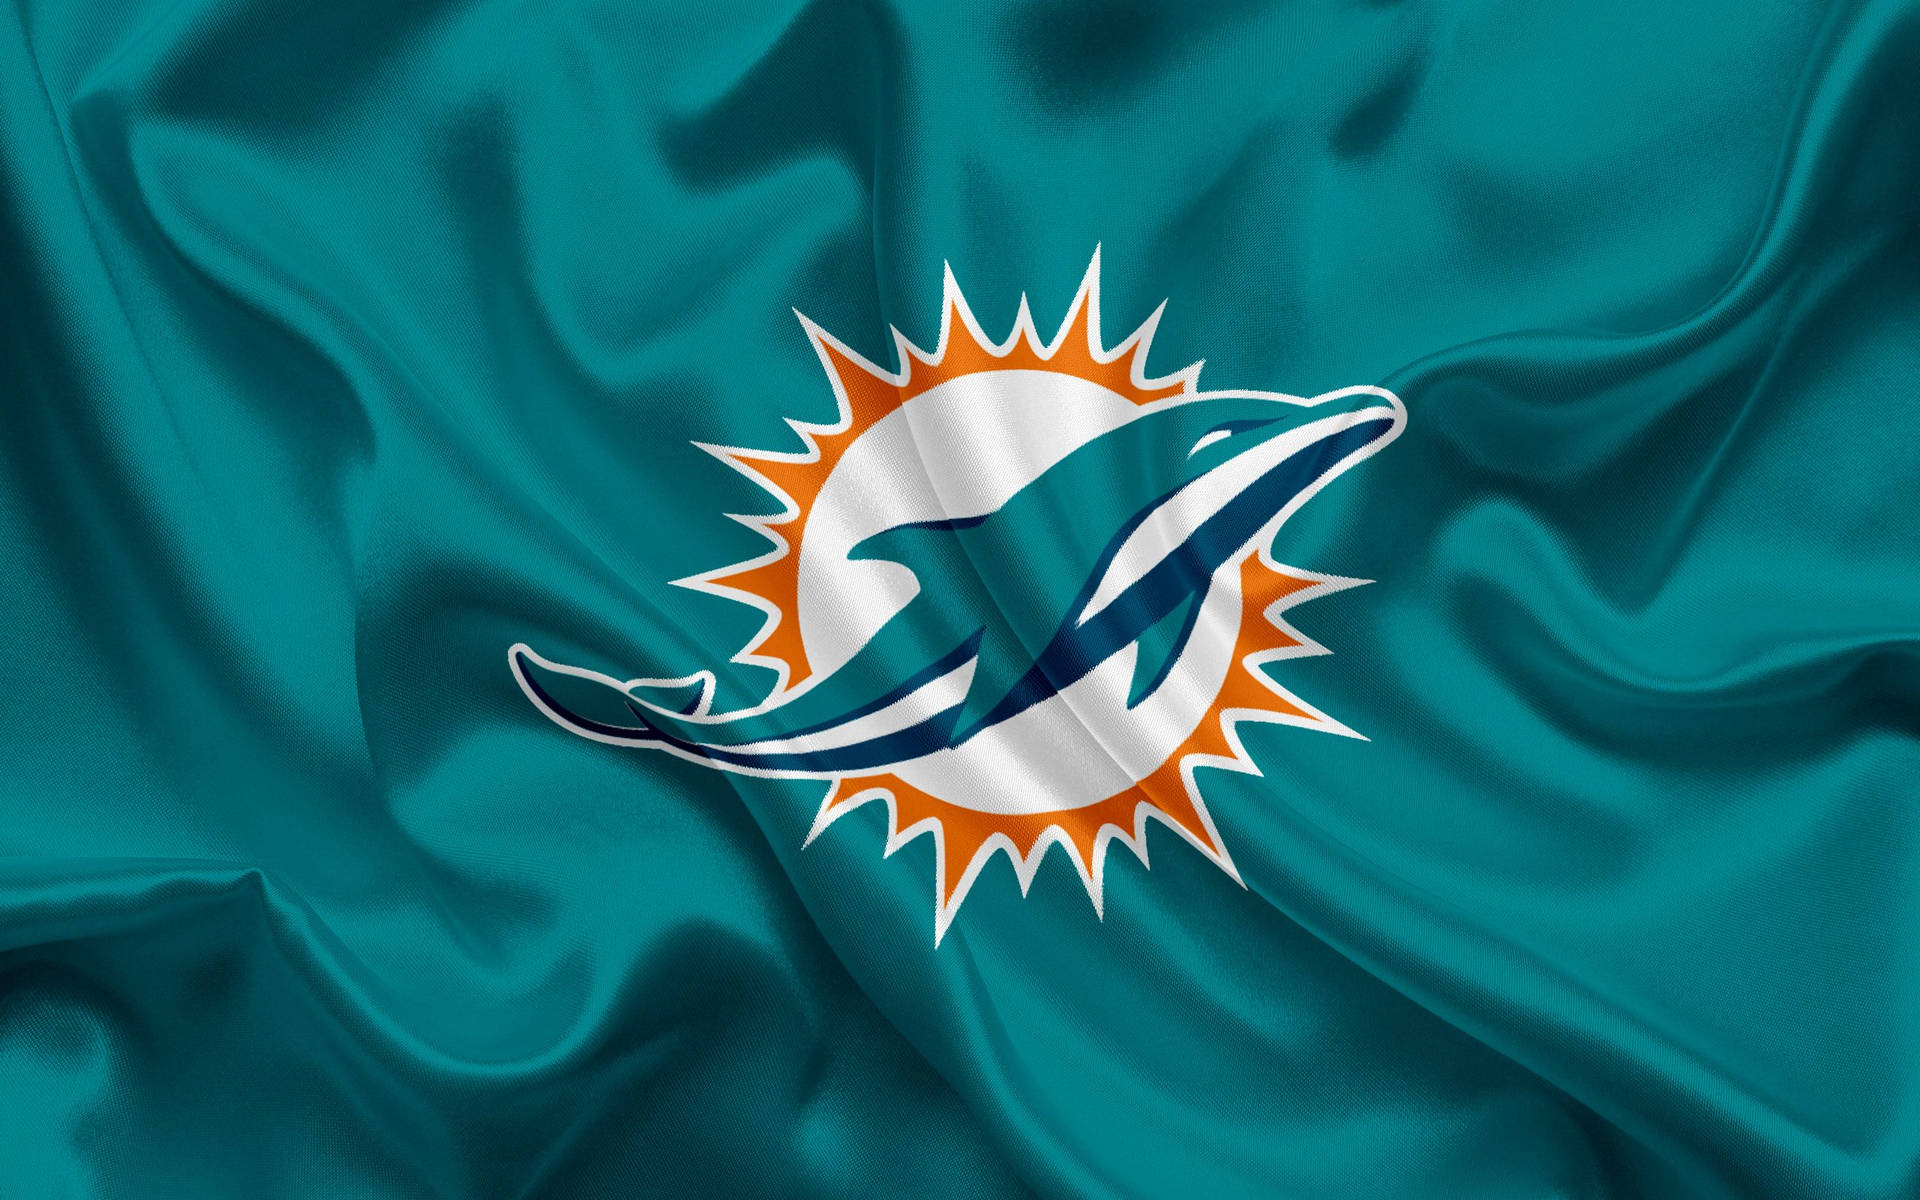 Miami Dolphins Fabric Background